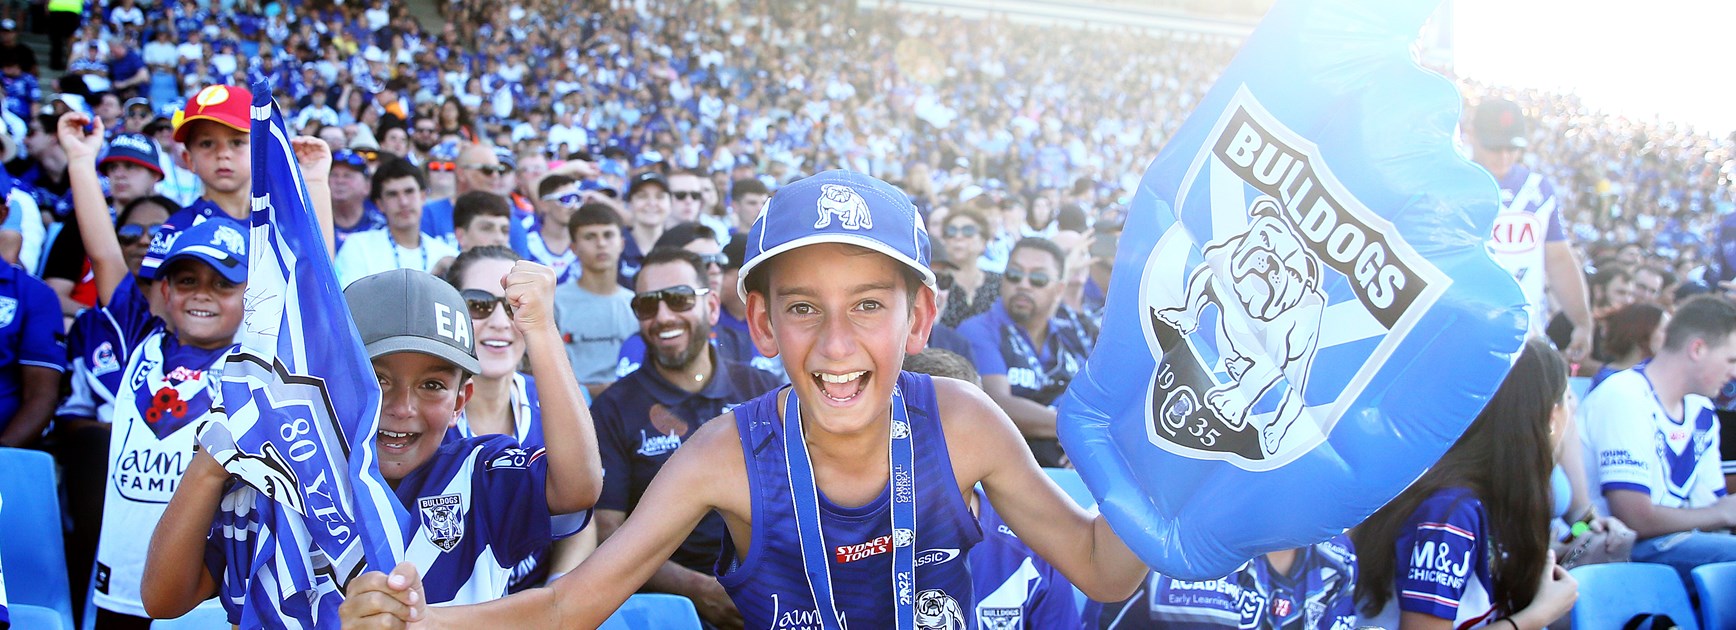 The 20,000+ Membership base is a seven-year best for the Club, to celebrate the Bulldogs have announced an open training and signing session for Members.